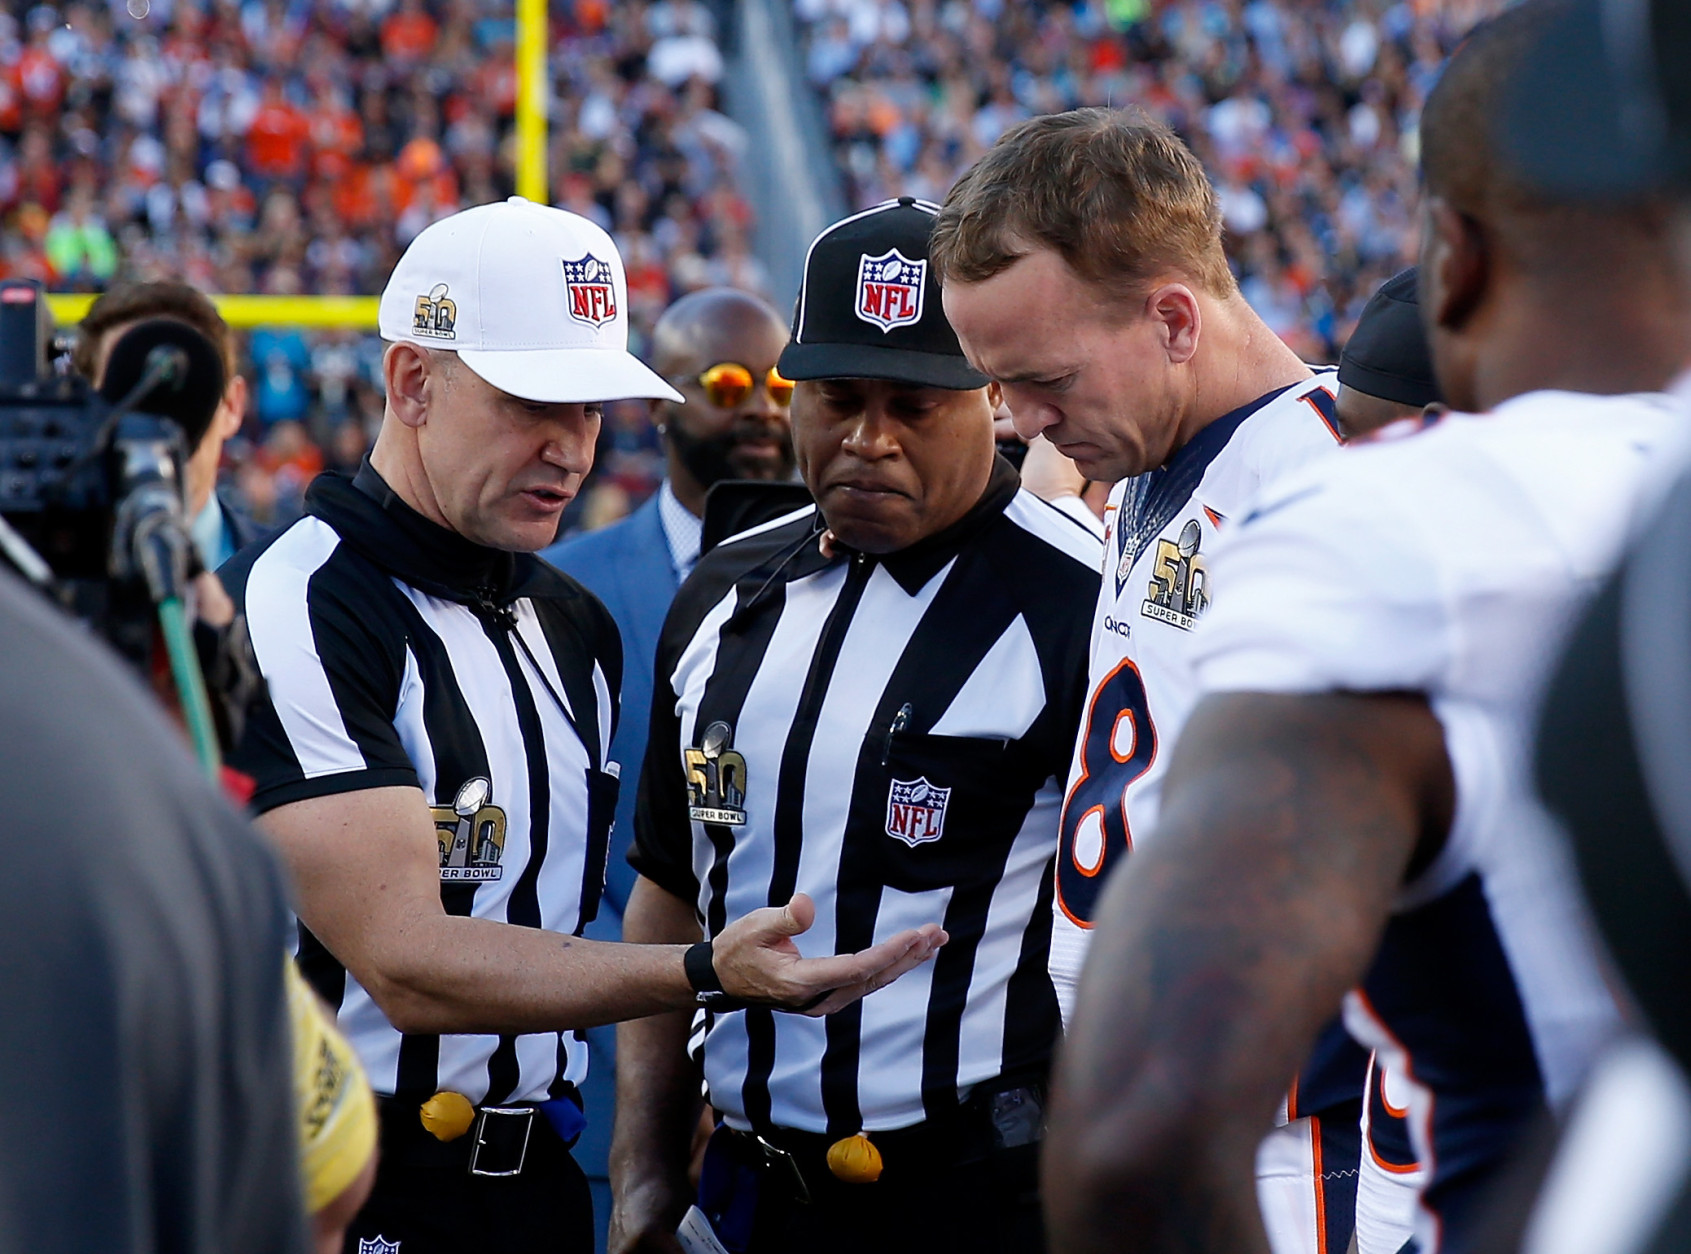 SANTA CLARA, CA - FEBRUARY 07:  Referee Clete Blakeman looks at the coin with  Peyton Manning #18 of the Denver Broncos prior to playing the Carolina Panthers in Super Bowl 50 at Levi's Stadium on February 7, 2016 in Santa Clara, California.  (Photo by Ezra Shaw/Getty Images)